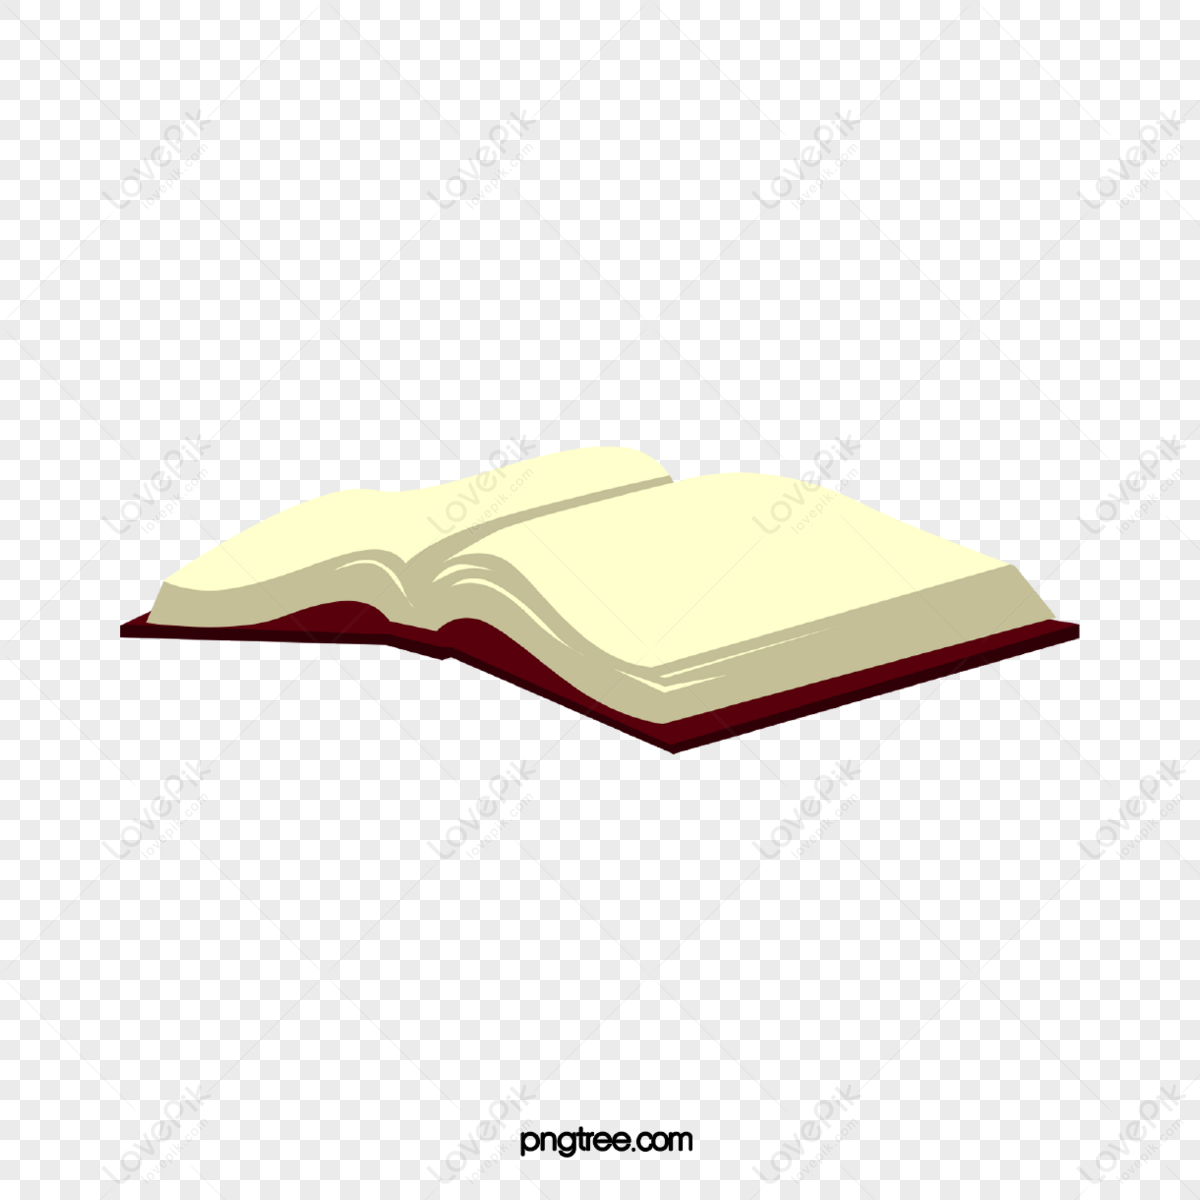 Open office stationery book,office supplies,student supplies,stationery cartoon free png